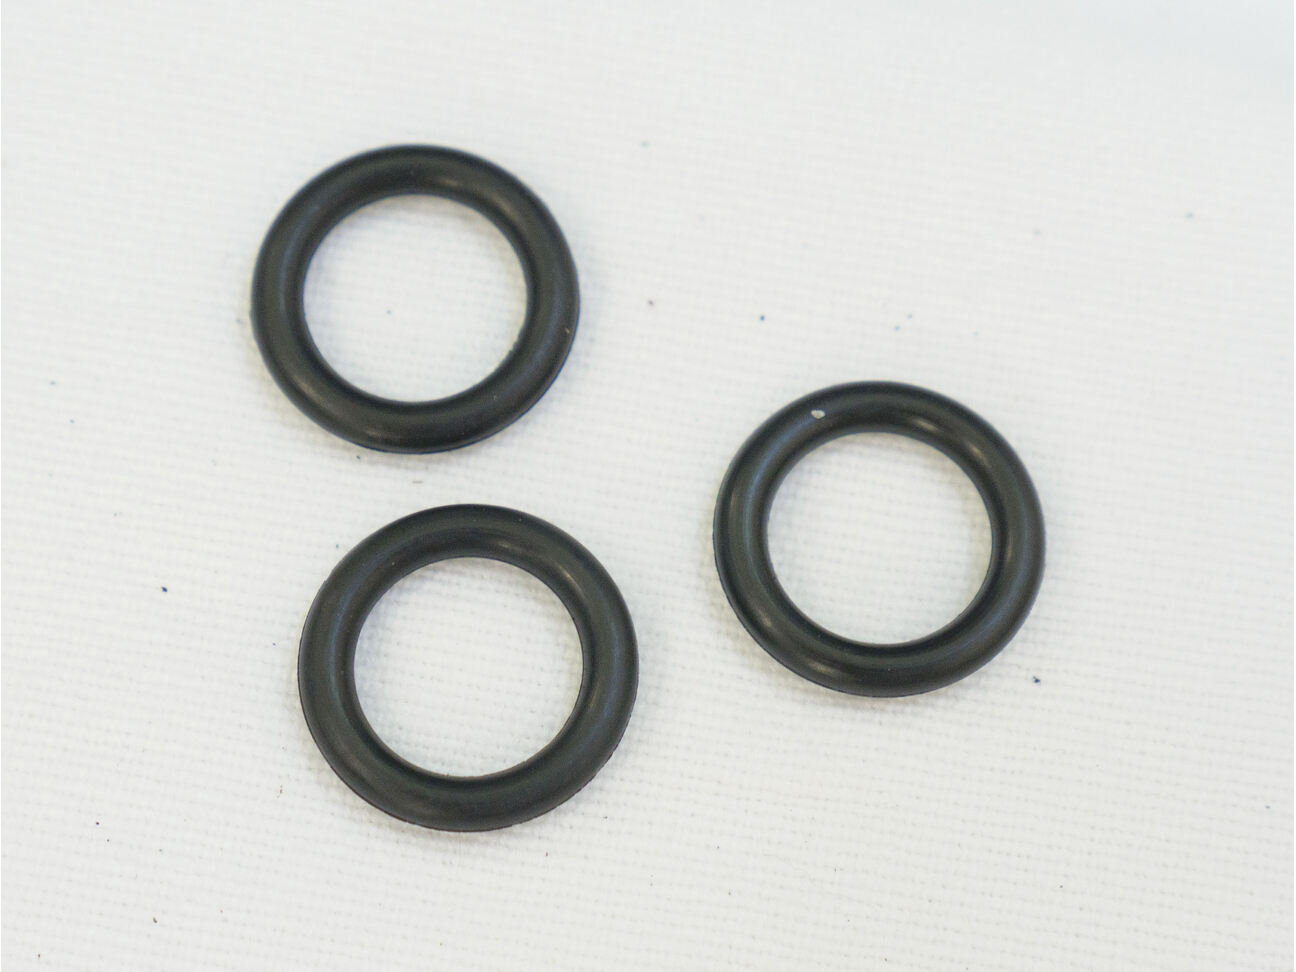 Sheridan PGP / PMI 1 bolt orings, new, 3 included, fits P Series